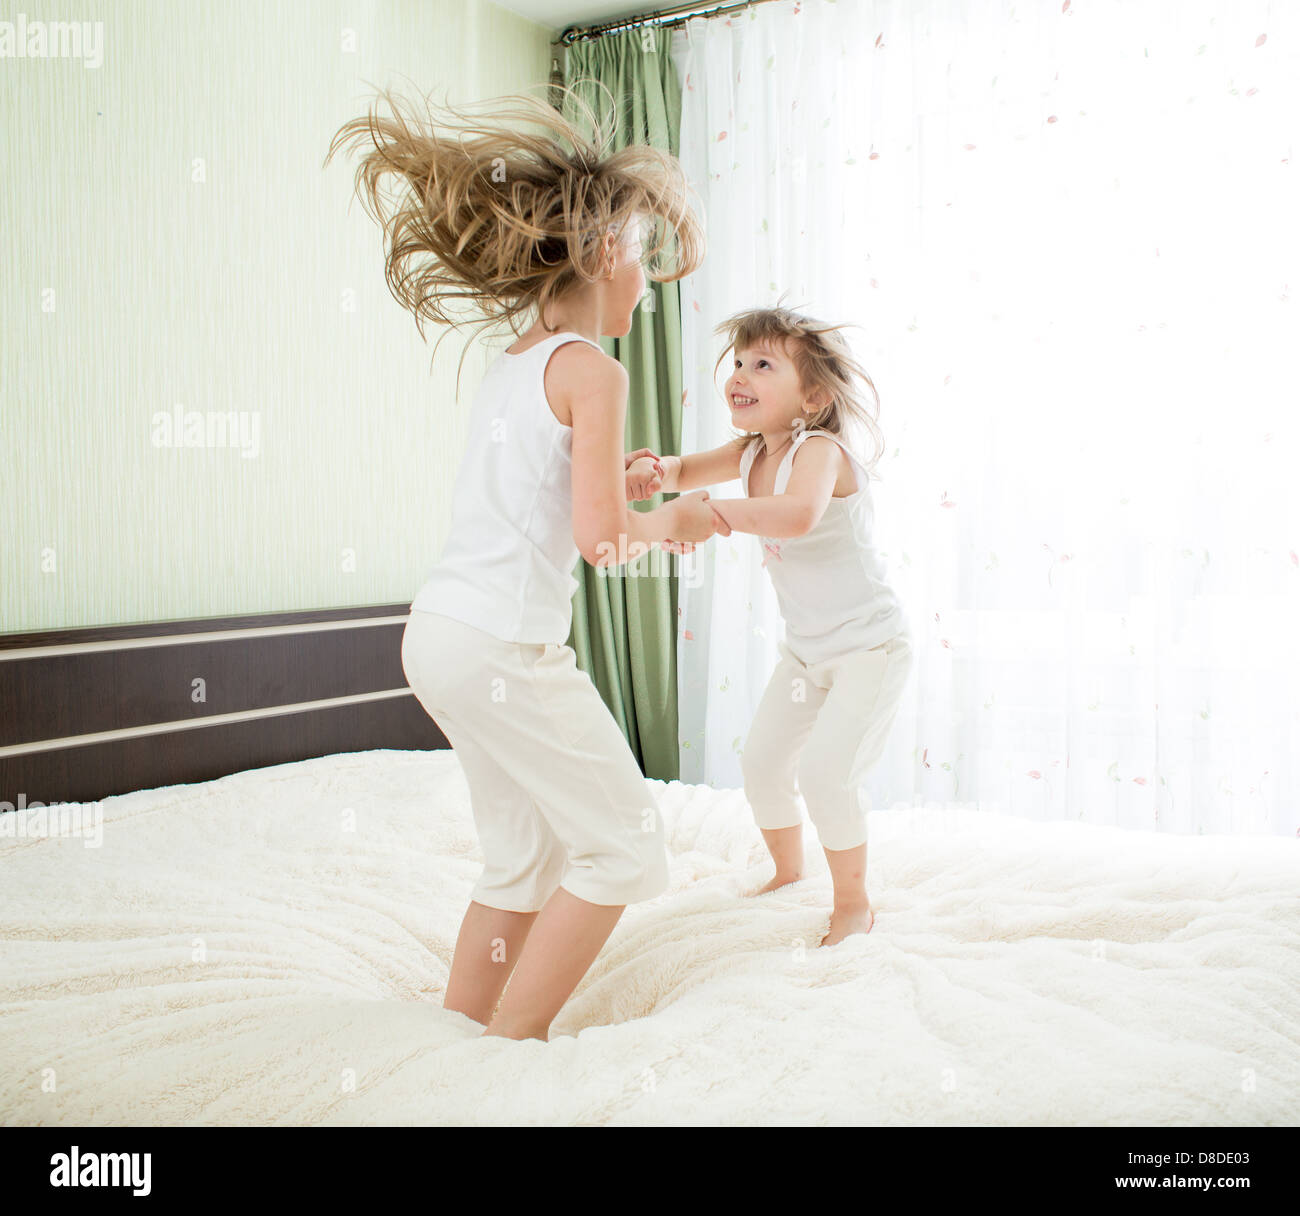 Little girls jumping on bed Banque D'Images